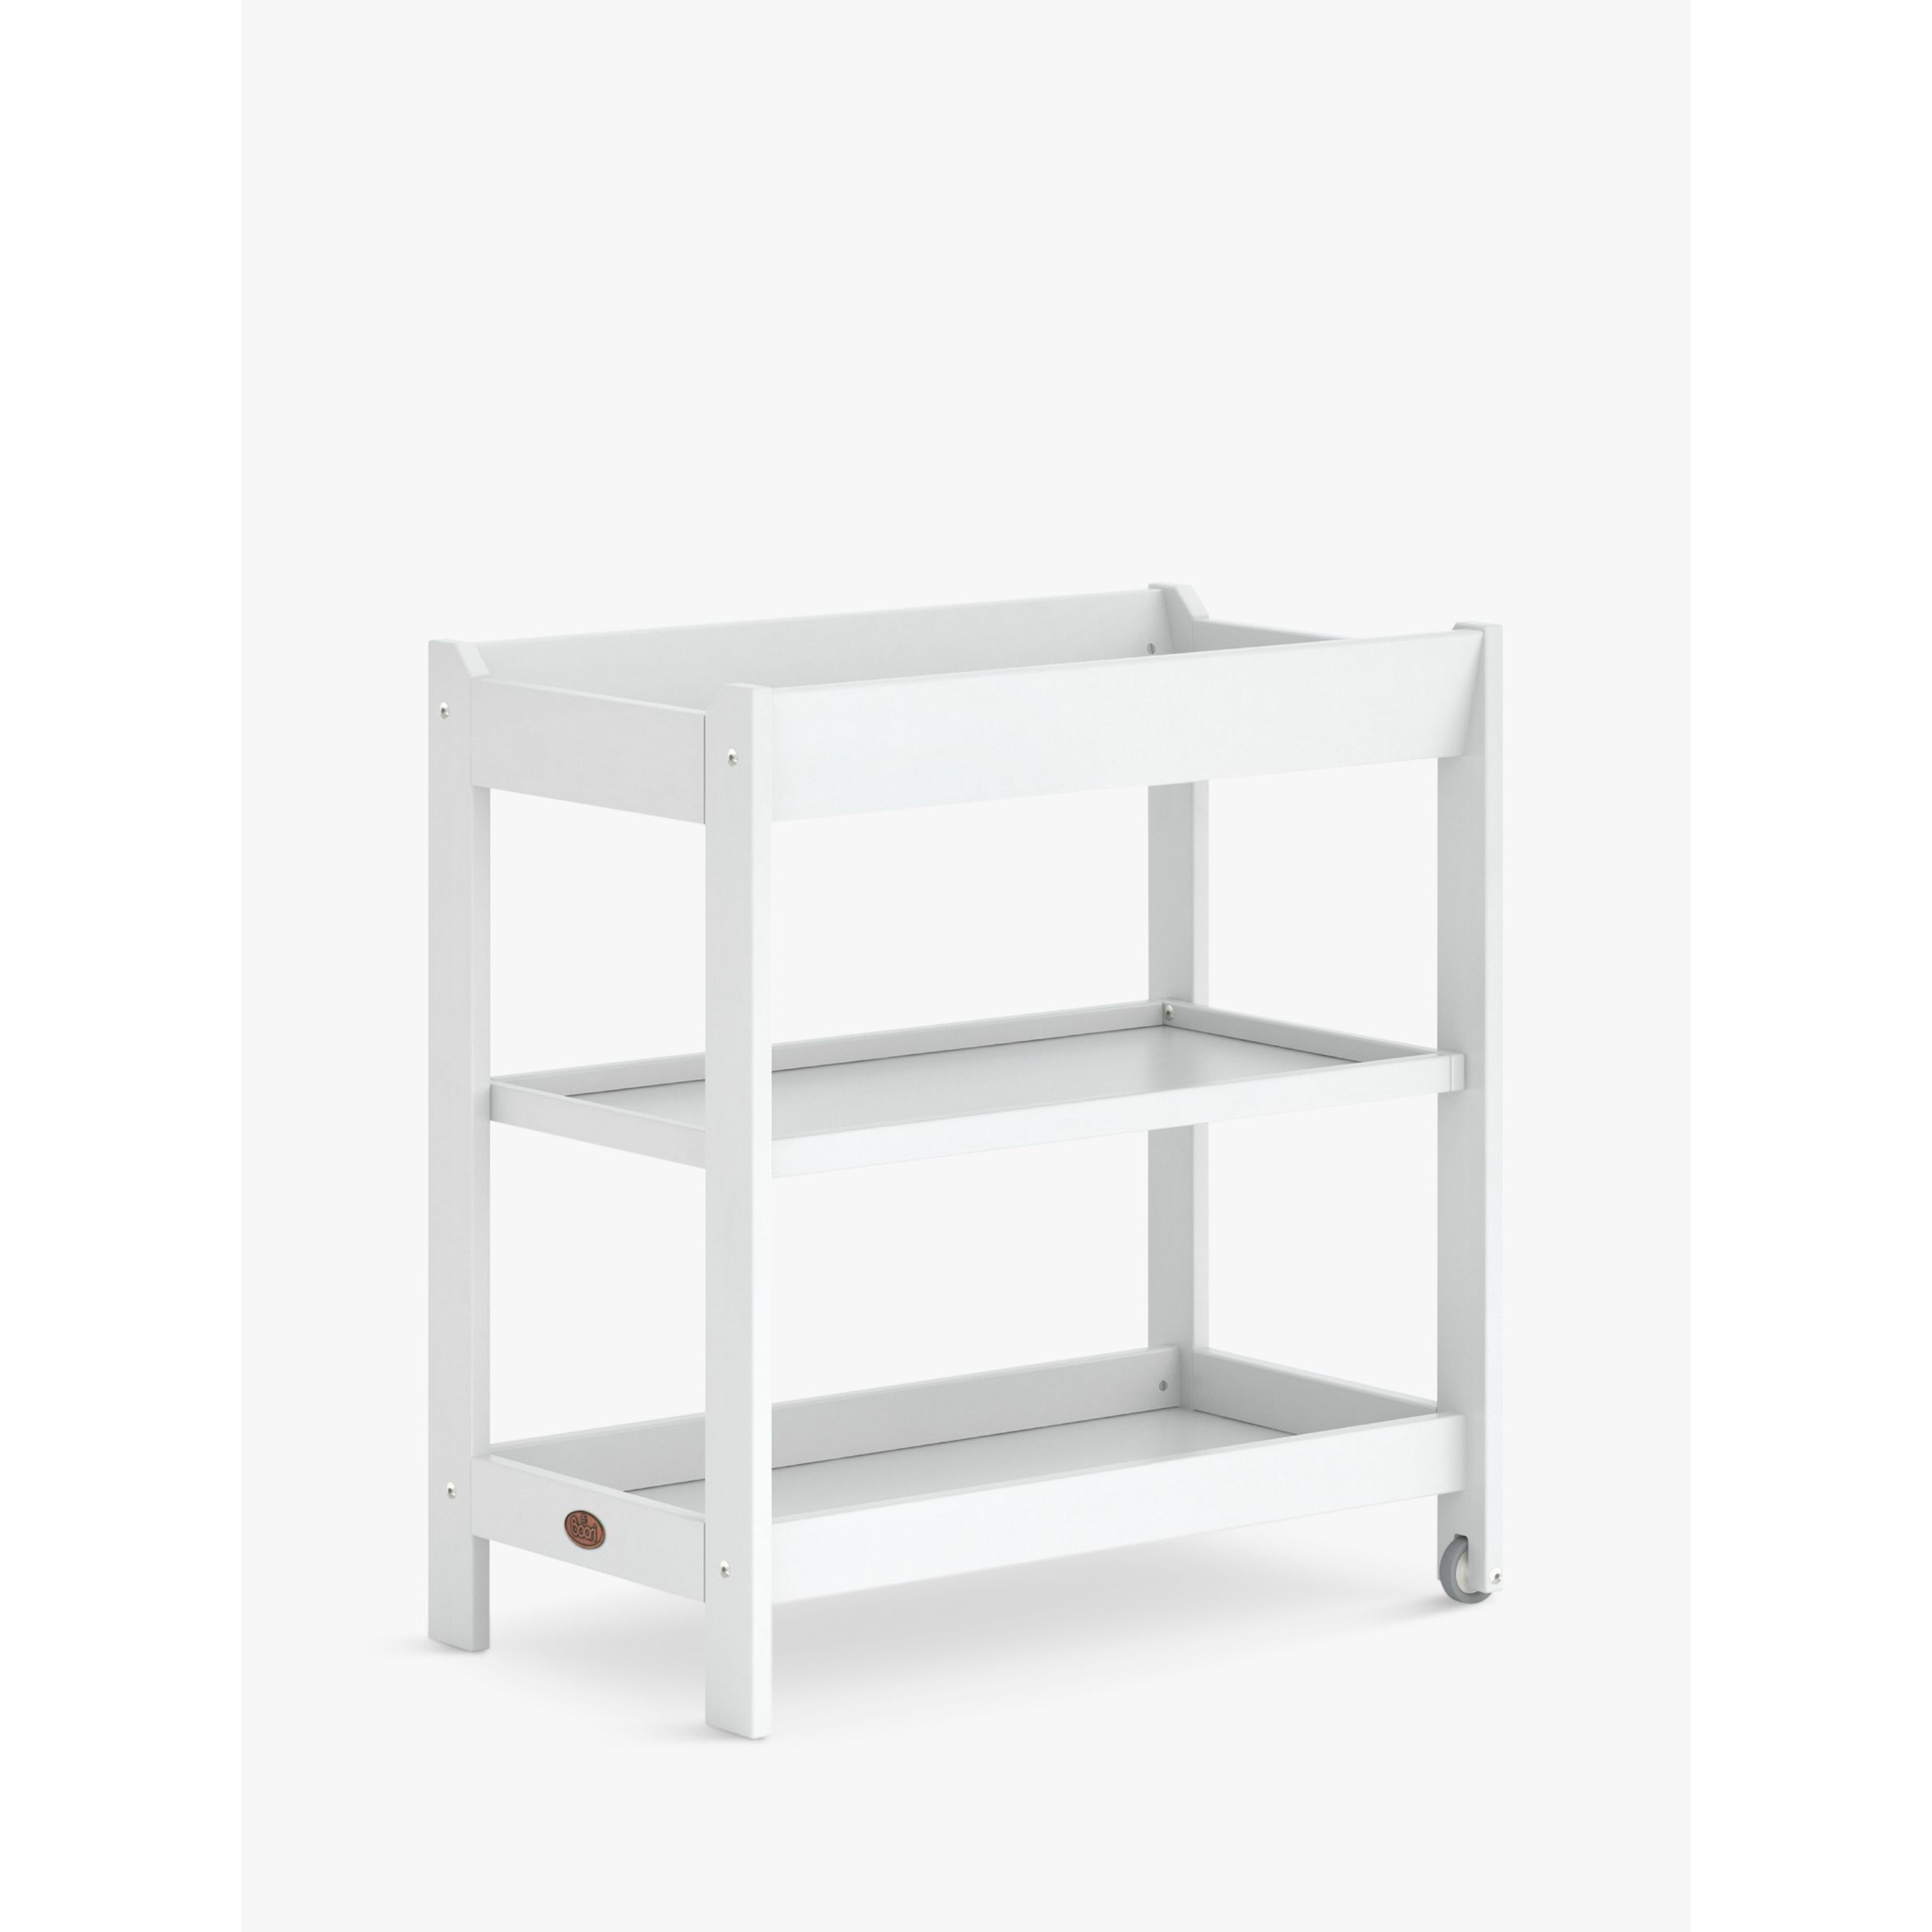 Boori 3 Tier Changing Table - image 1